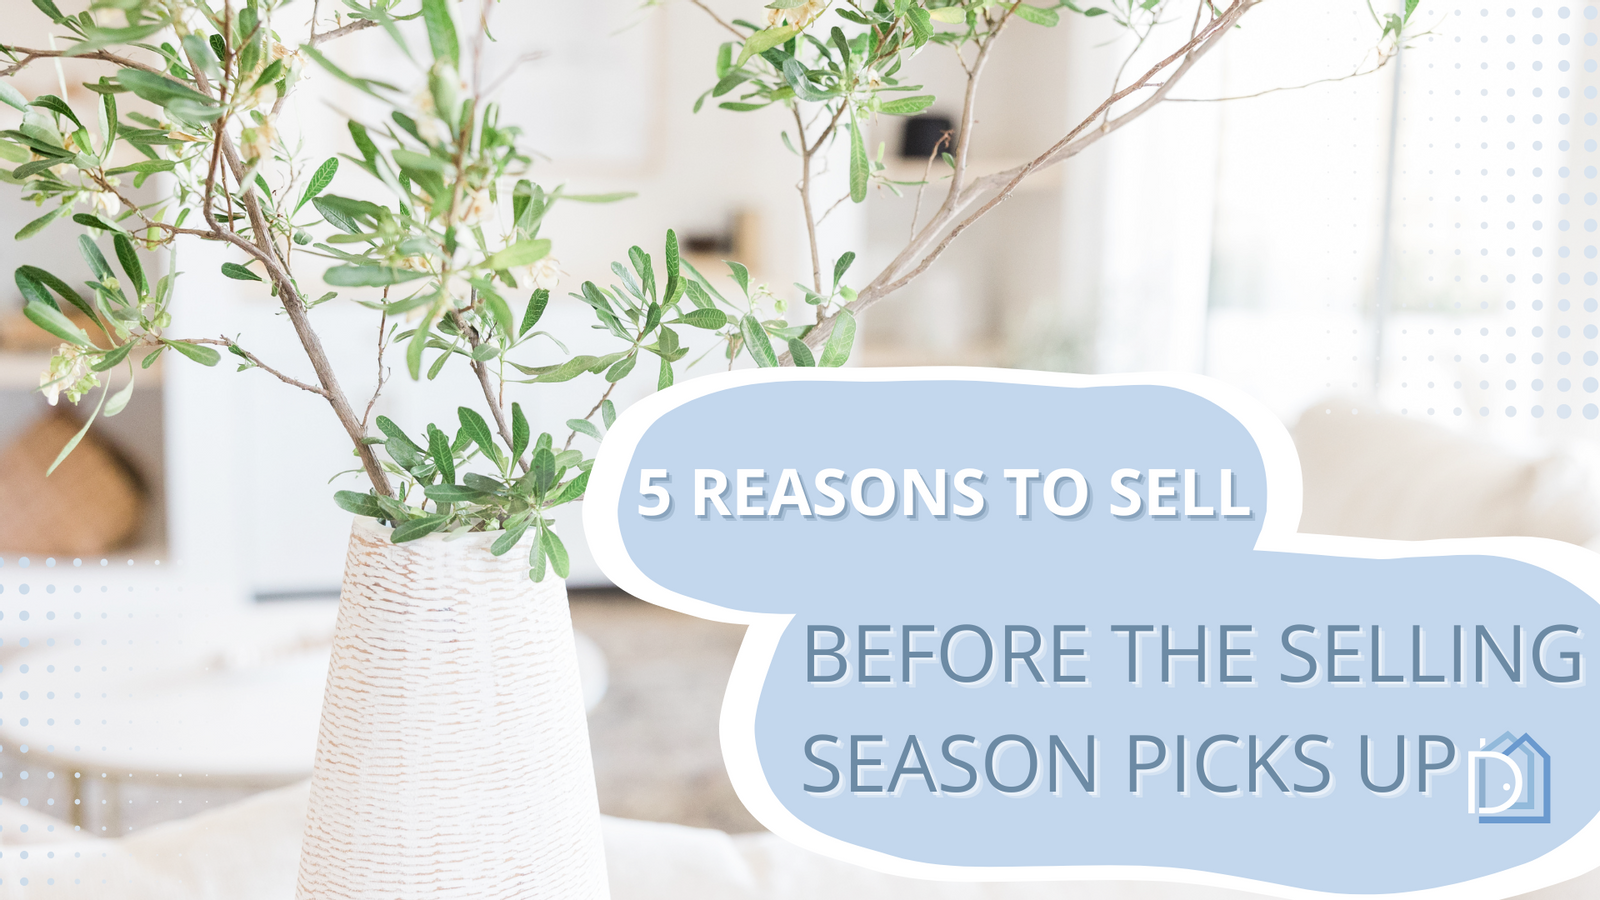 5 Reasons to Sell Before the Selling Season Picks Up